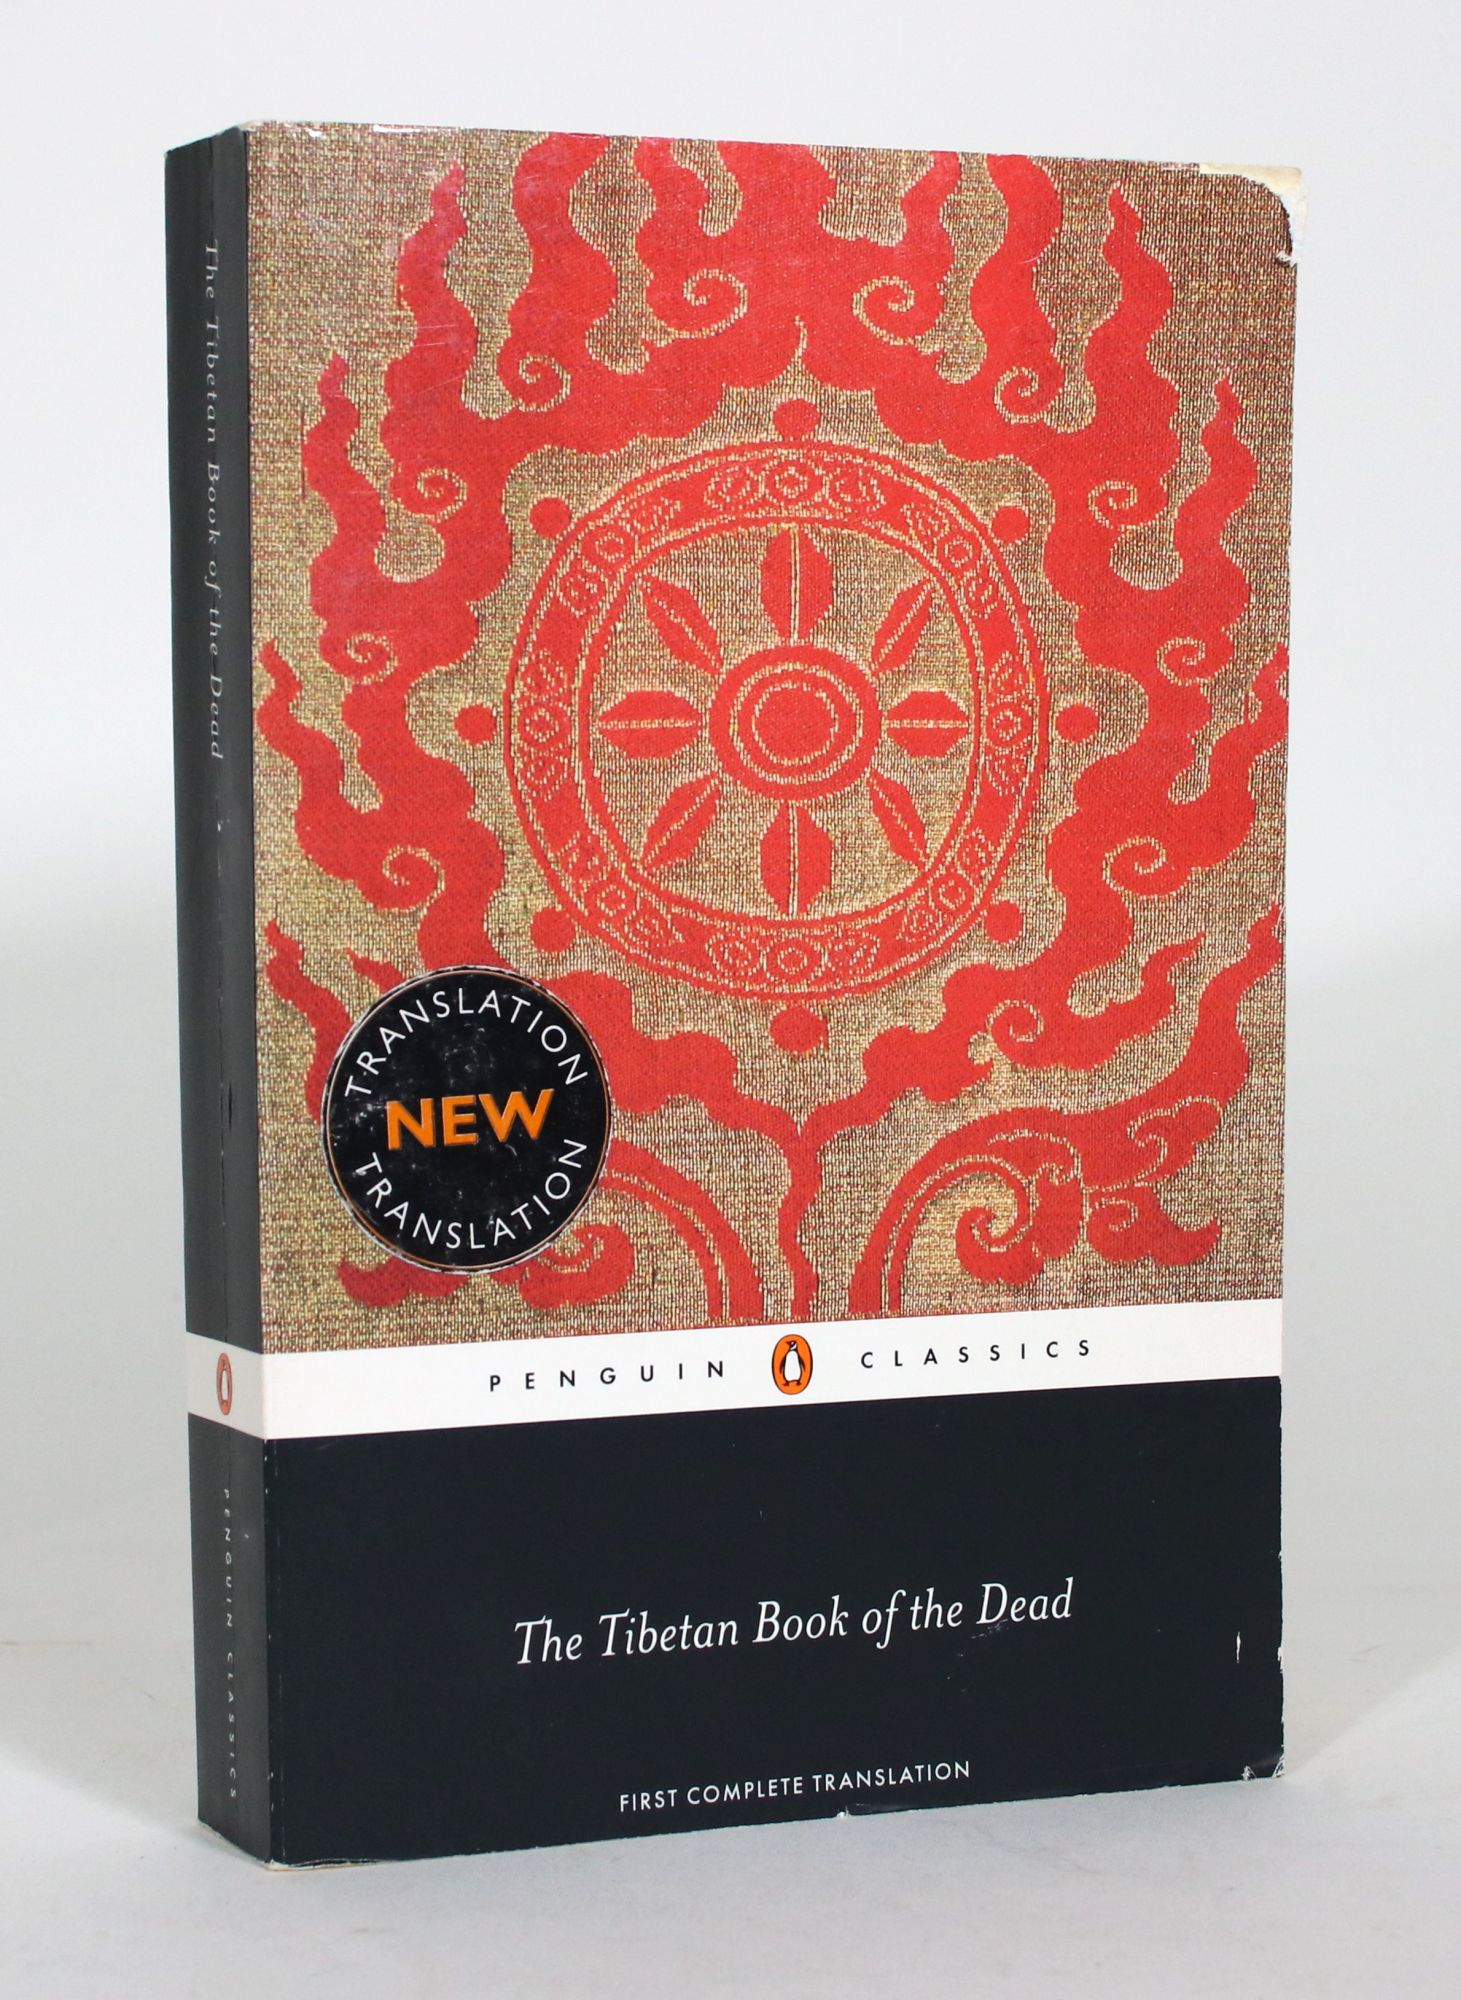 The Tibetan Book of the Dead [English Title]. The Great Liberation by Hearing in The Intermediate States [Tibetan Title] - Padmasambhava (composed by); Lingpa, Terton Karma (revealed by); Dorje, Gyurme (translator); Coleman, Graham and Thuuten Jinpa (editors)